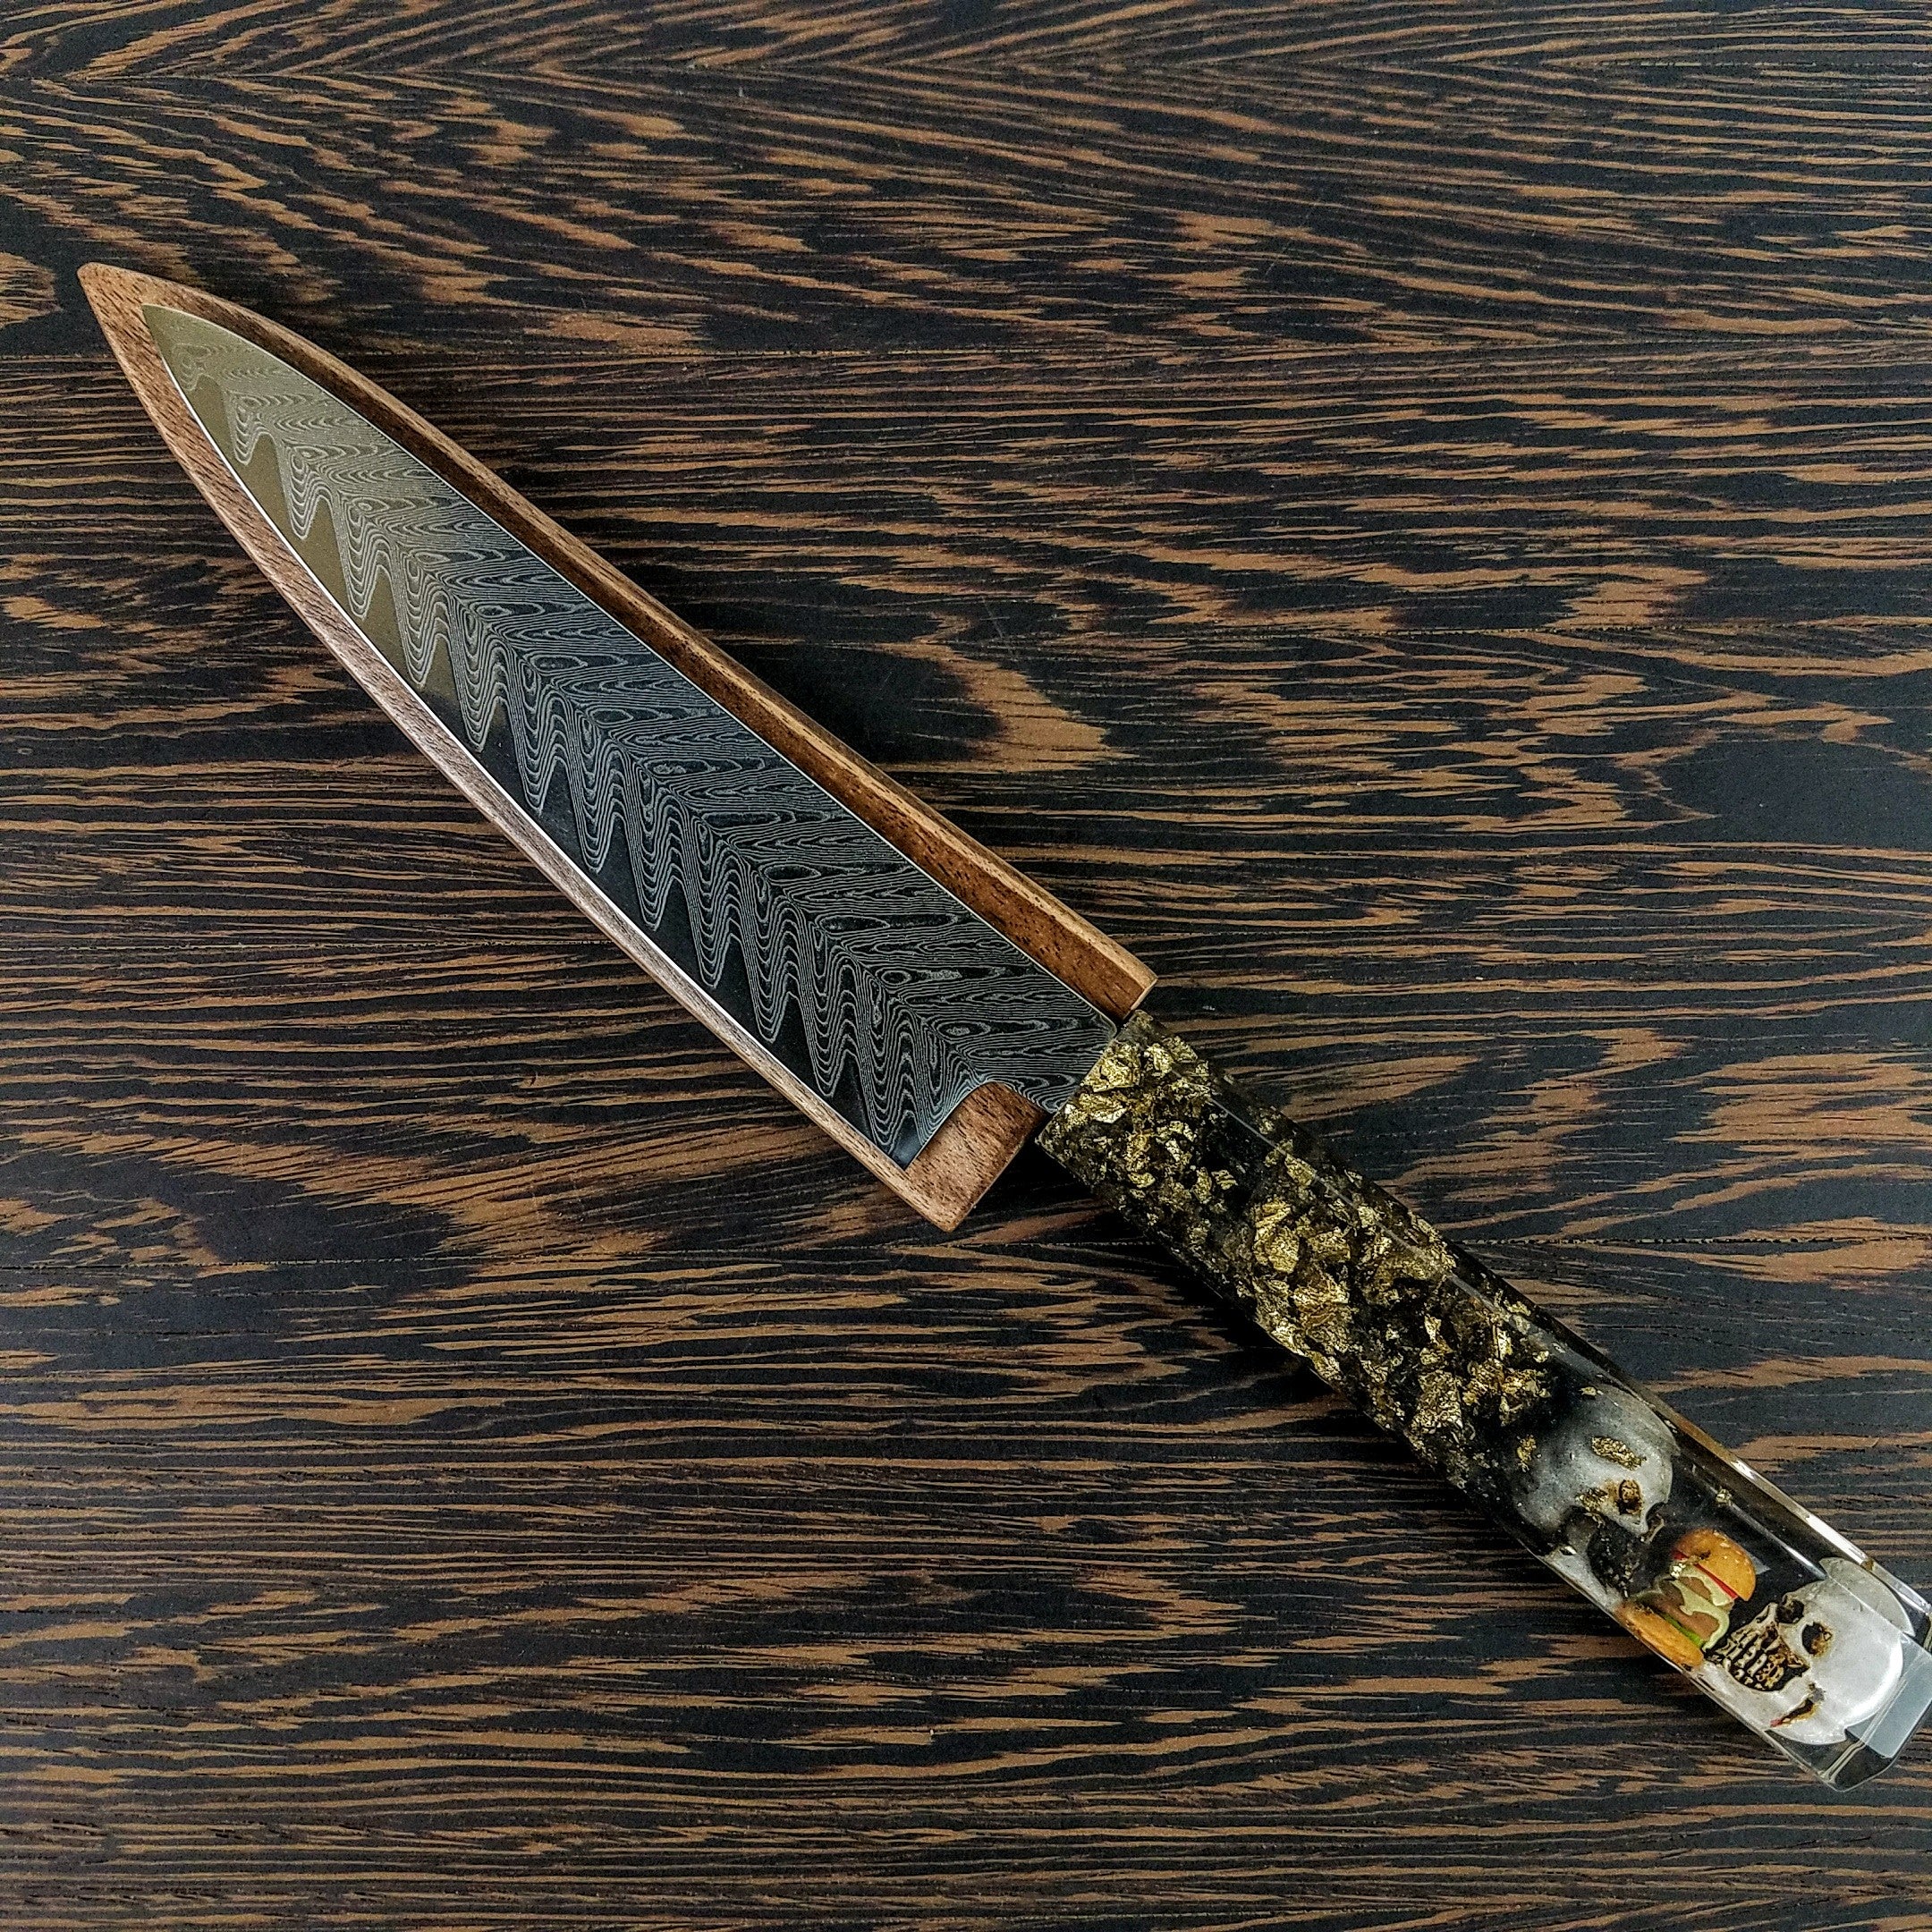 Dirty Double Decker - 6in (150mm) Damascus Petty Culinary Knife - Soul Built